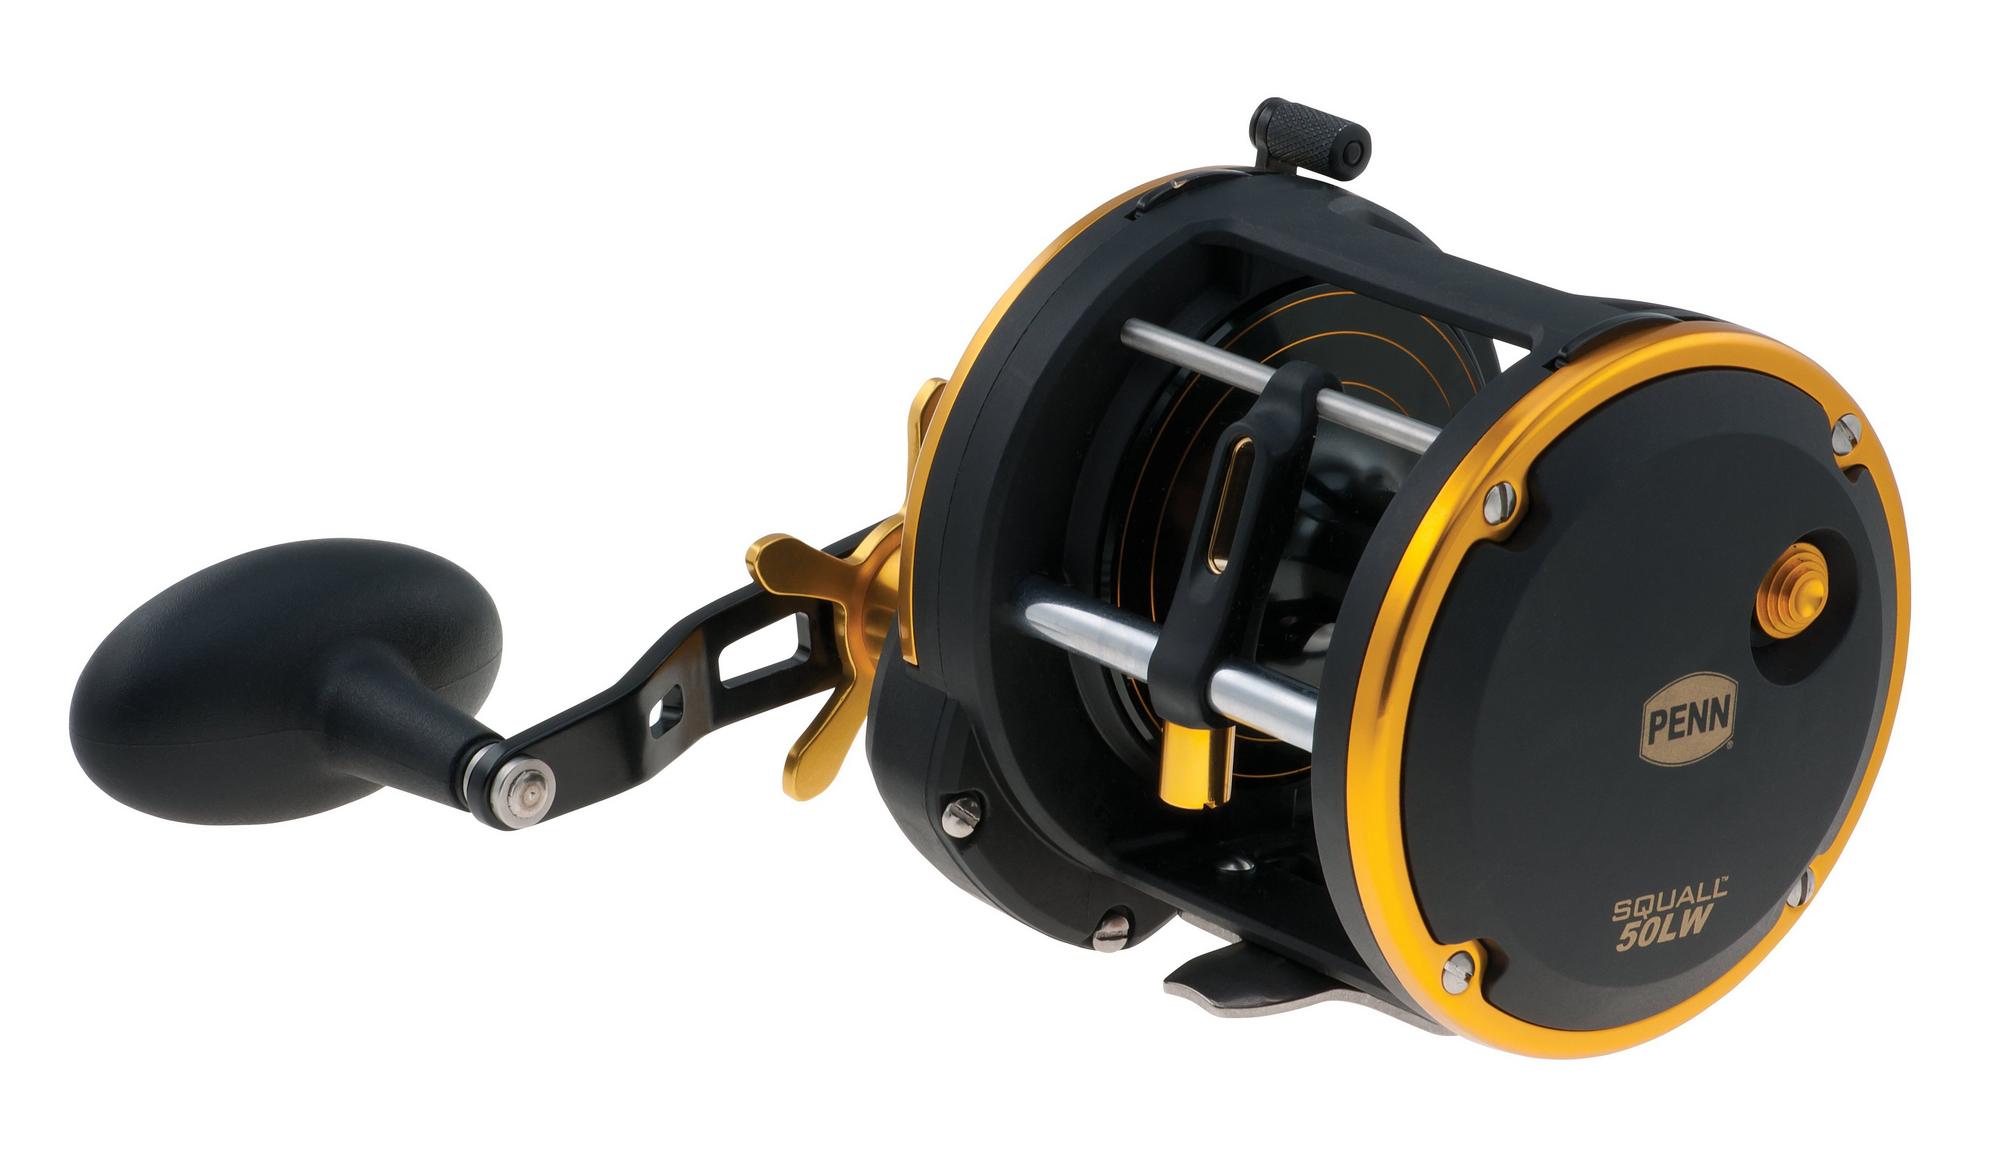 Penn Squall 50 LW Levelwind Reel - Buy from NZ owned businesses